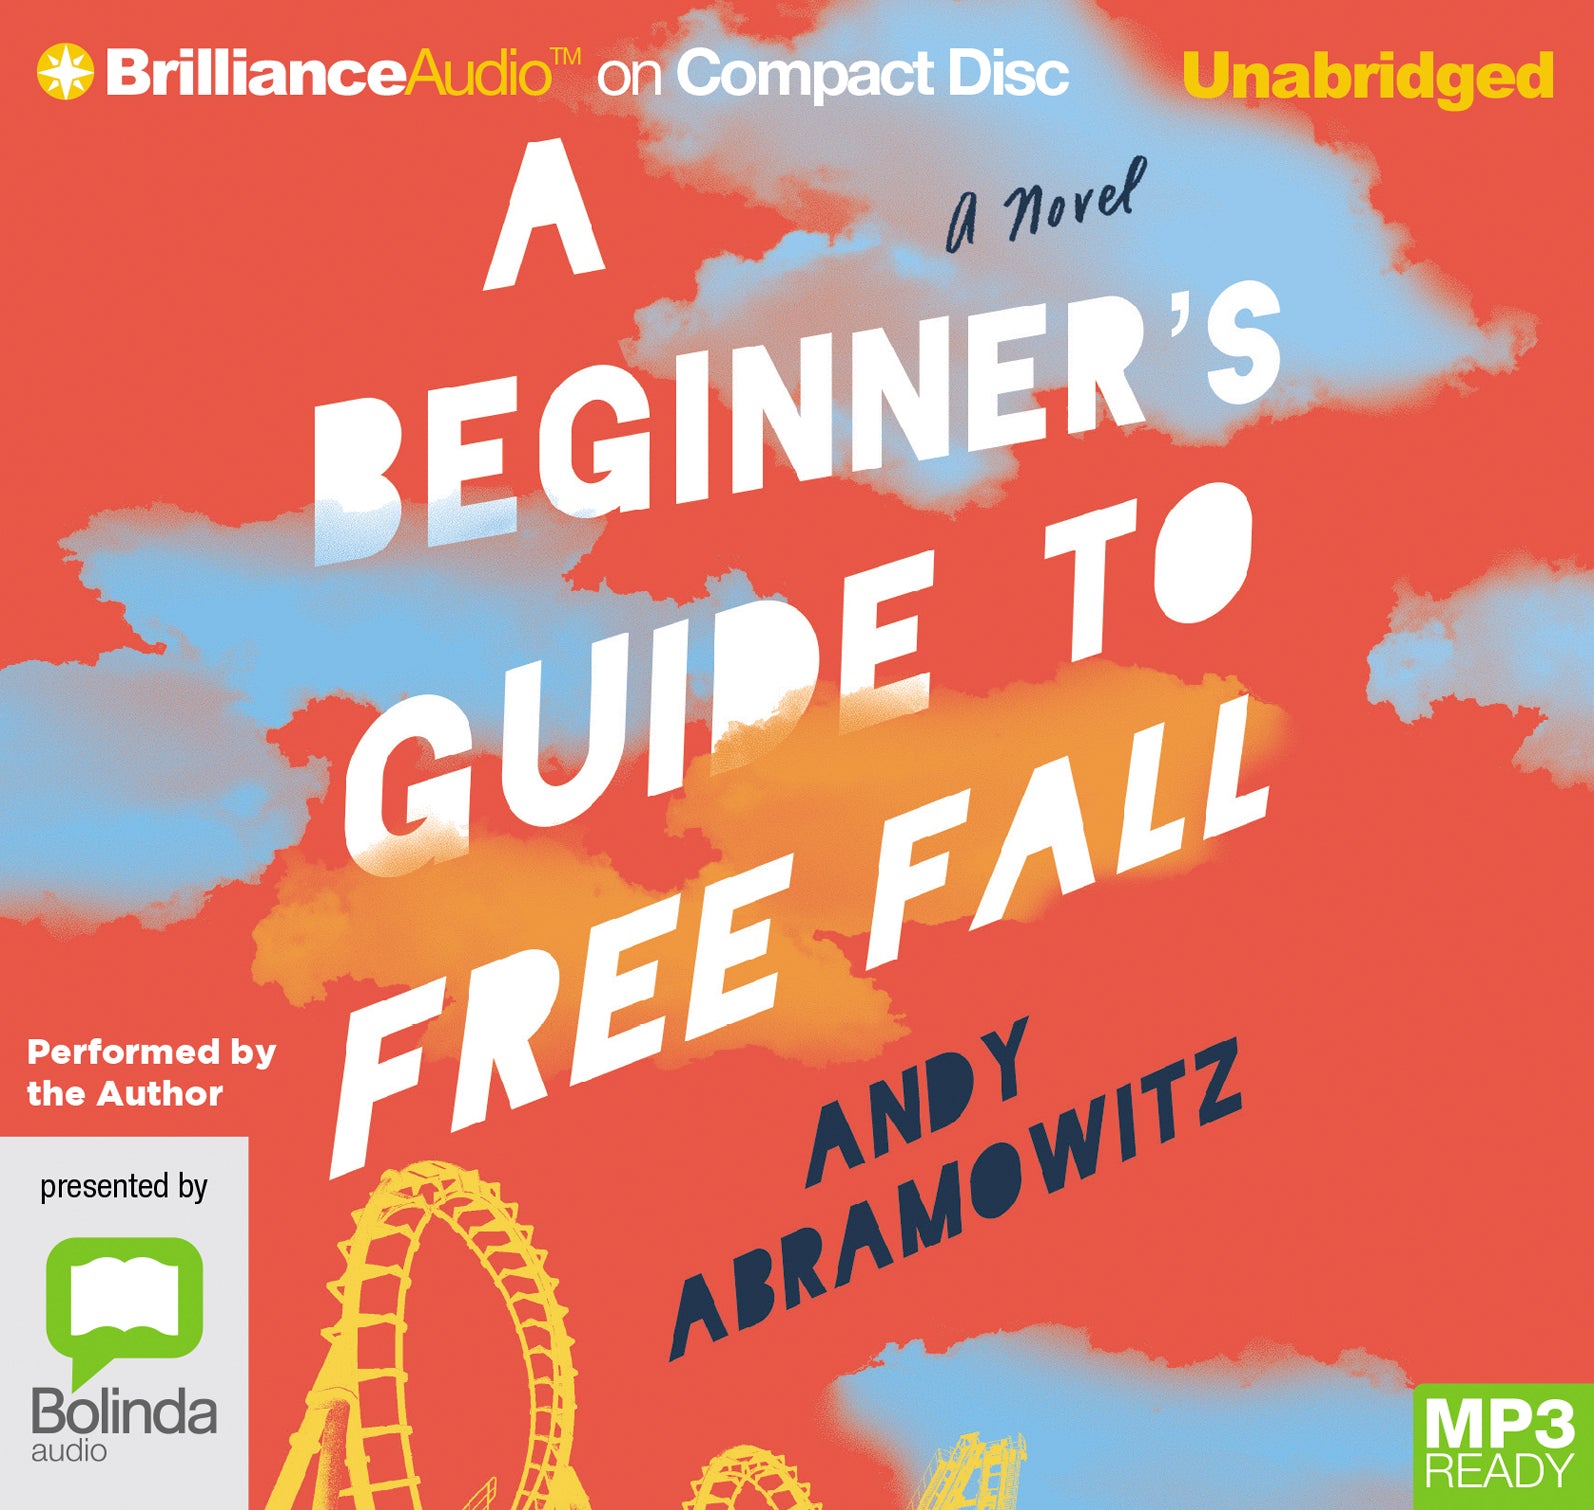 A Beginner's Guide To Free Fall  - Unbridged Audio Book on MP3